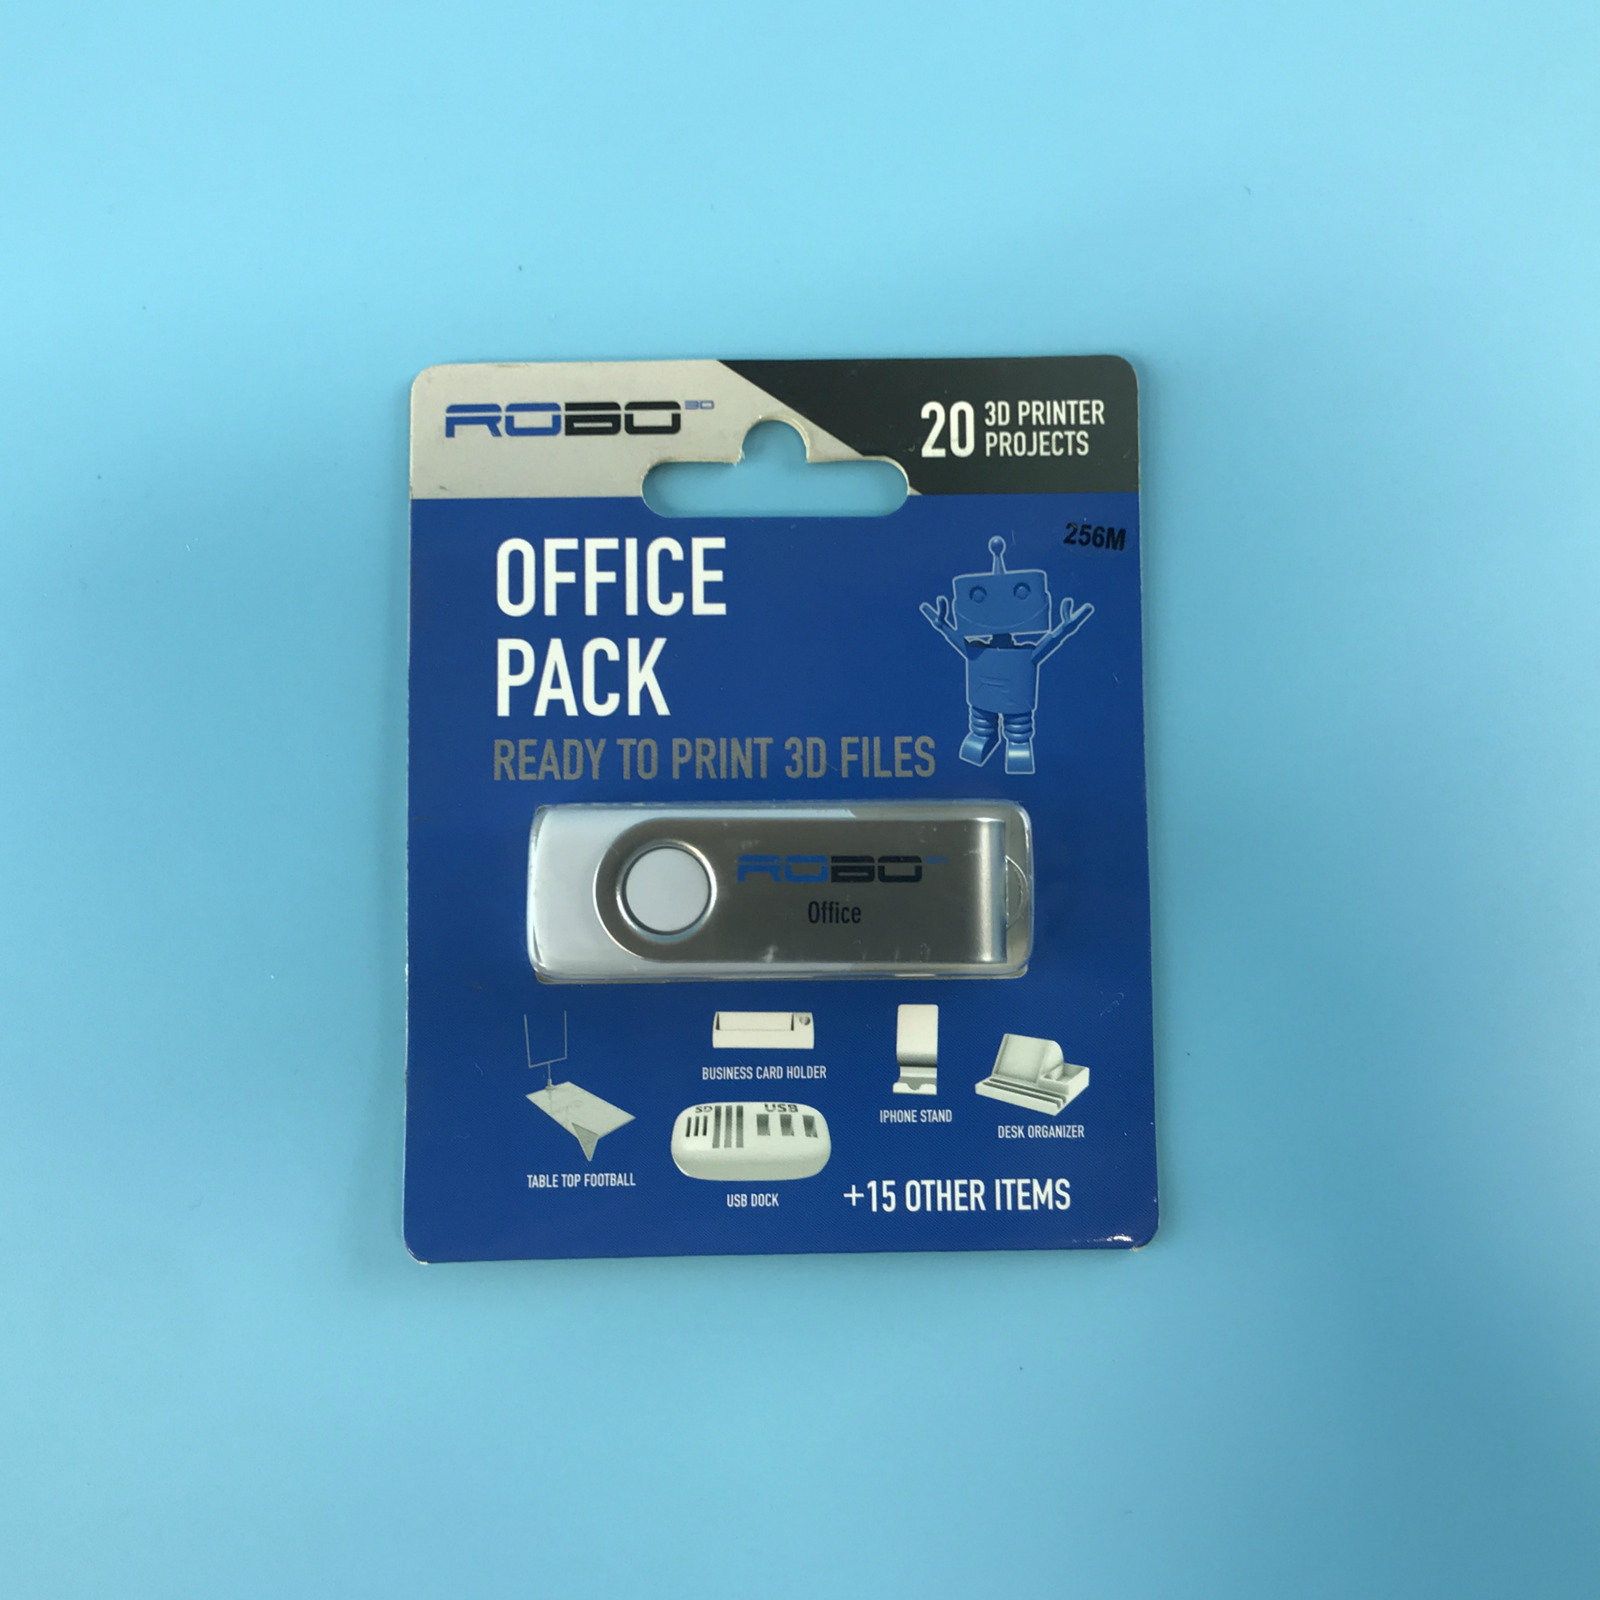 ROBO 3D Office Pack Ready to Print 20 3D Files #5356